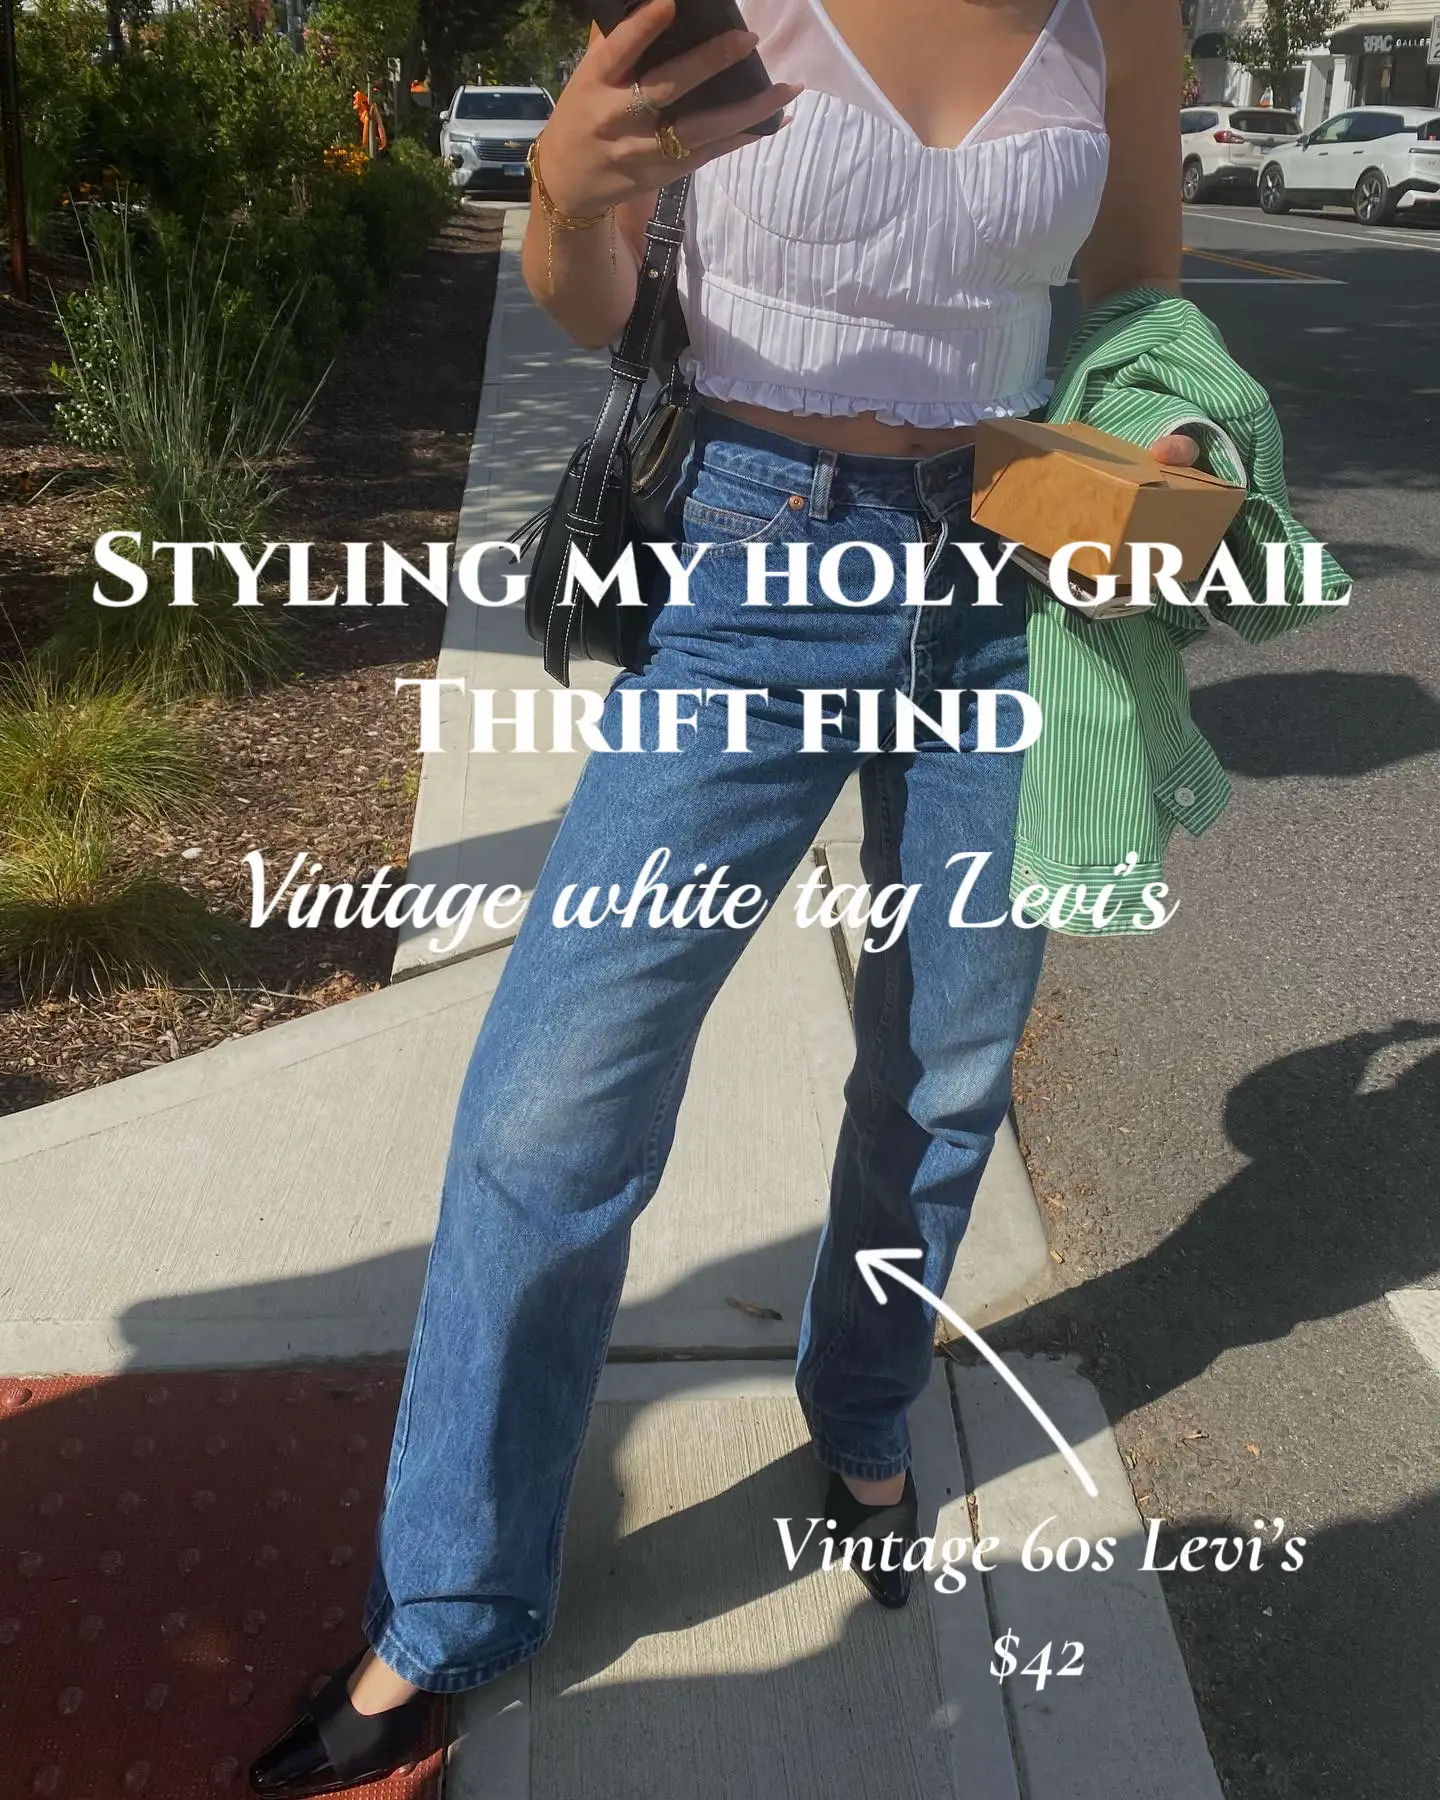 Styling my holy grail thrift find, Gallery posted by Kendallflavin